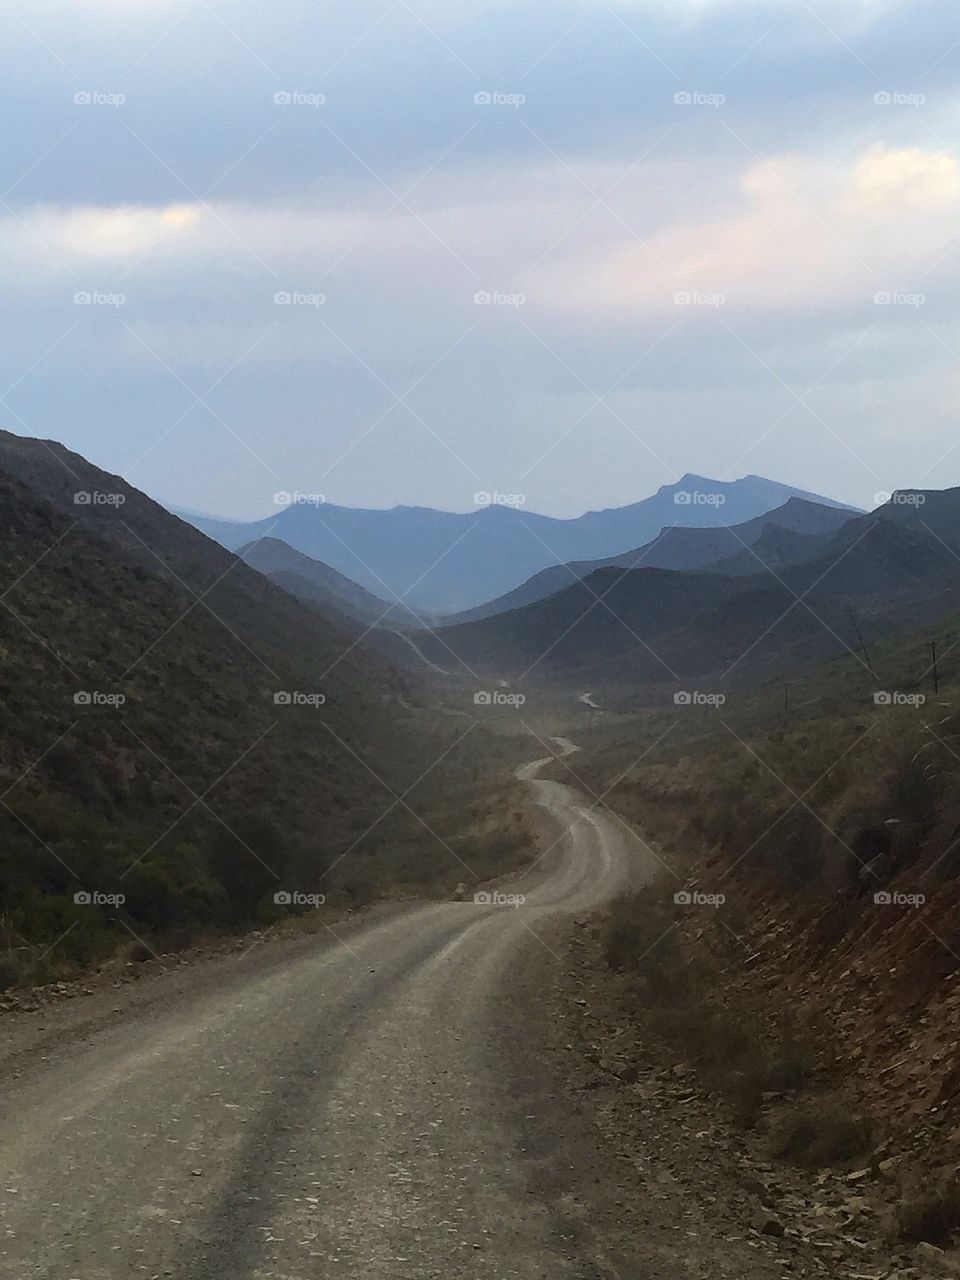 Cederberg road to nowhere